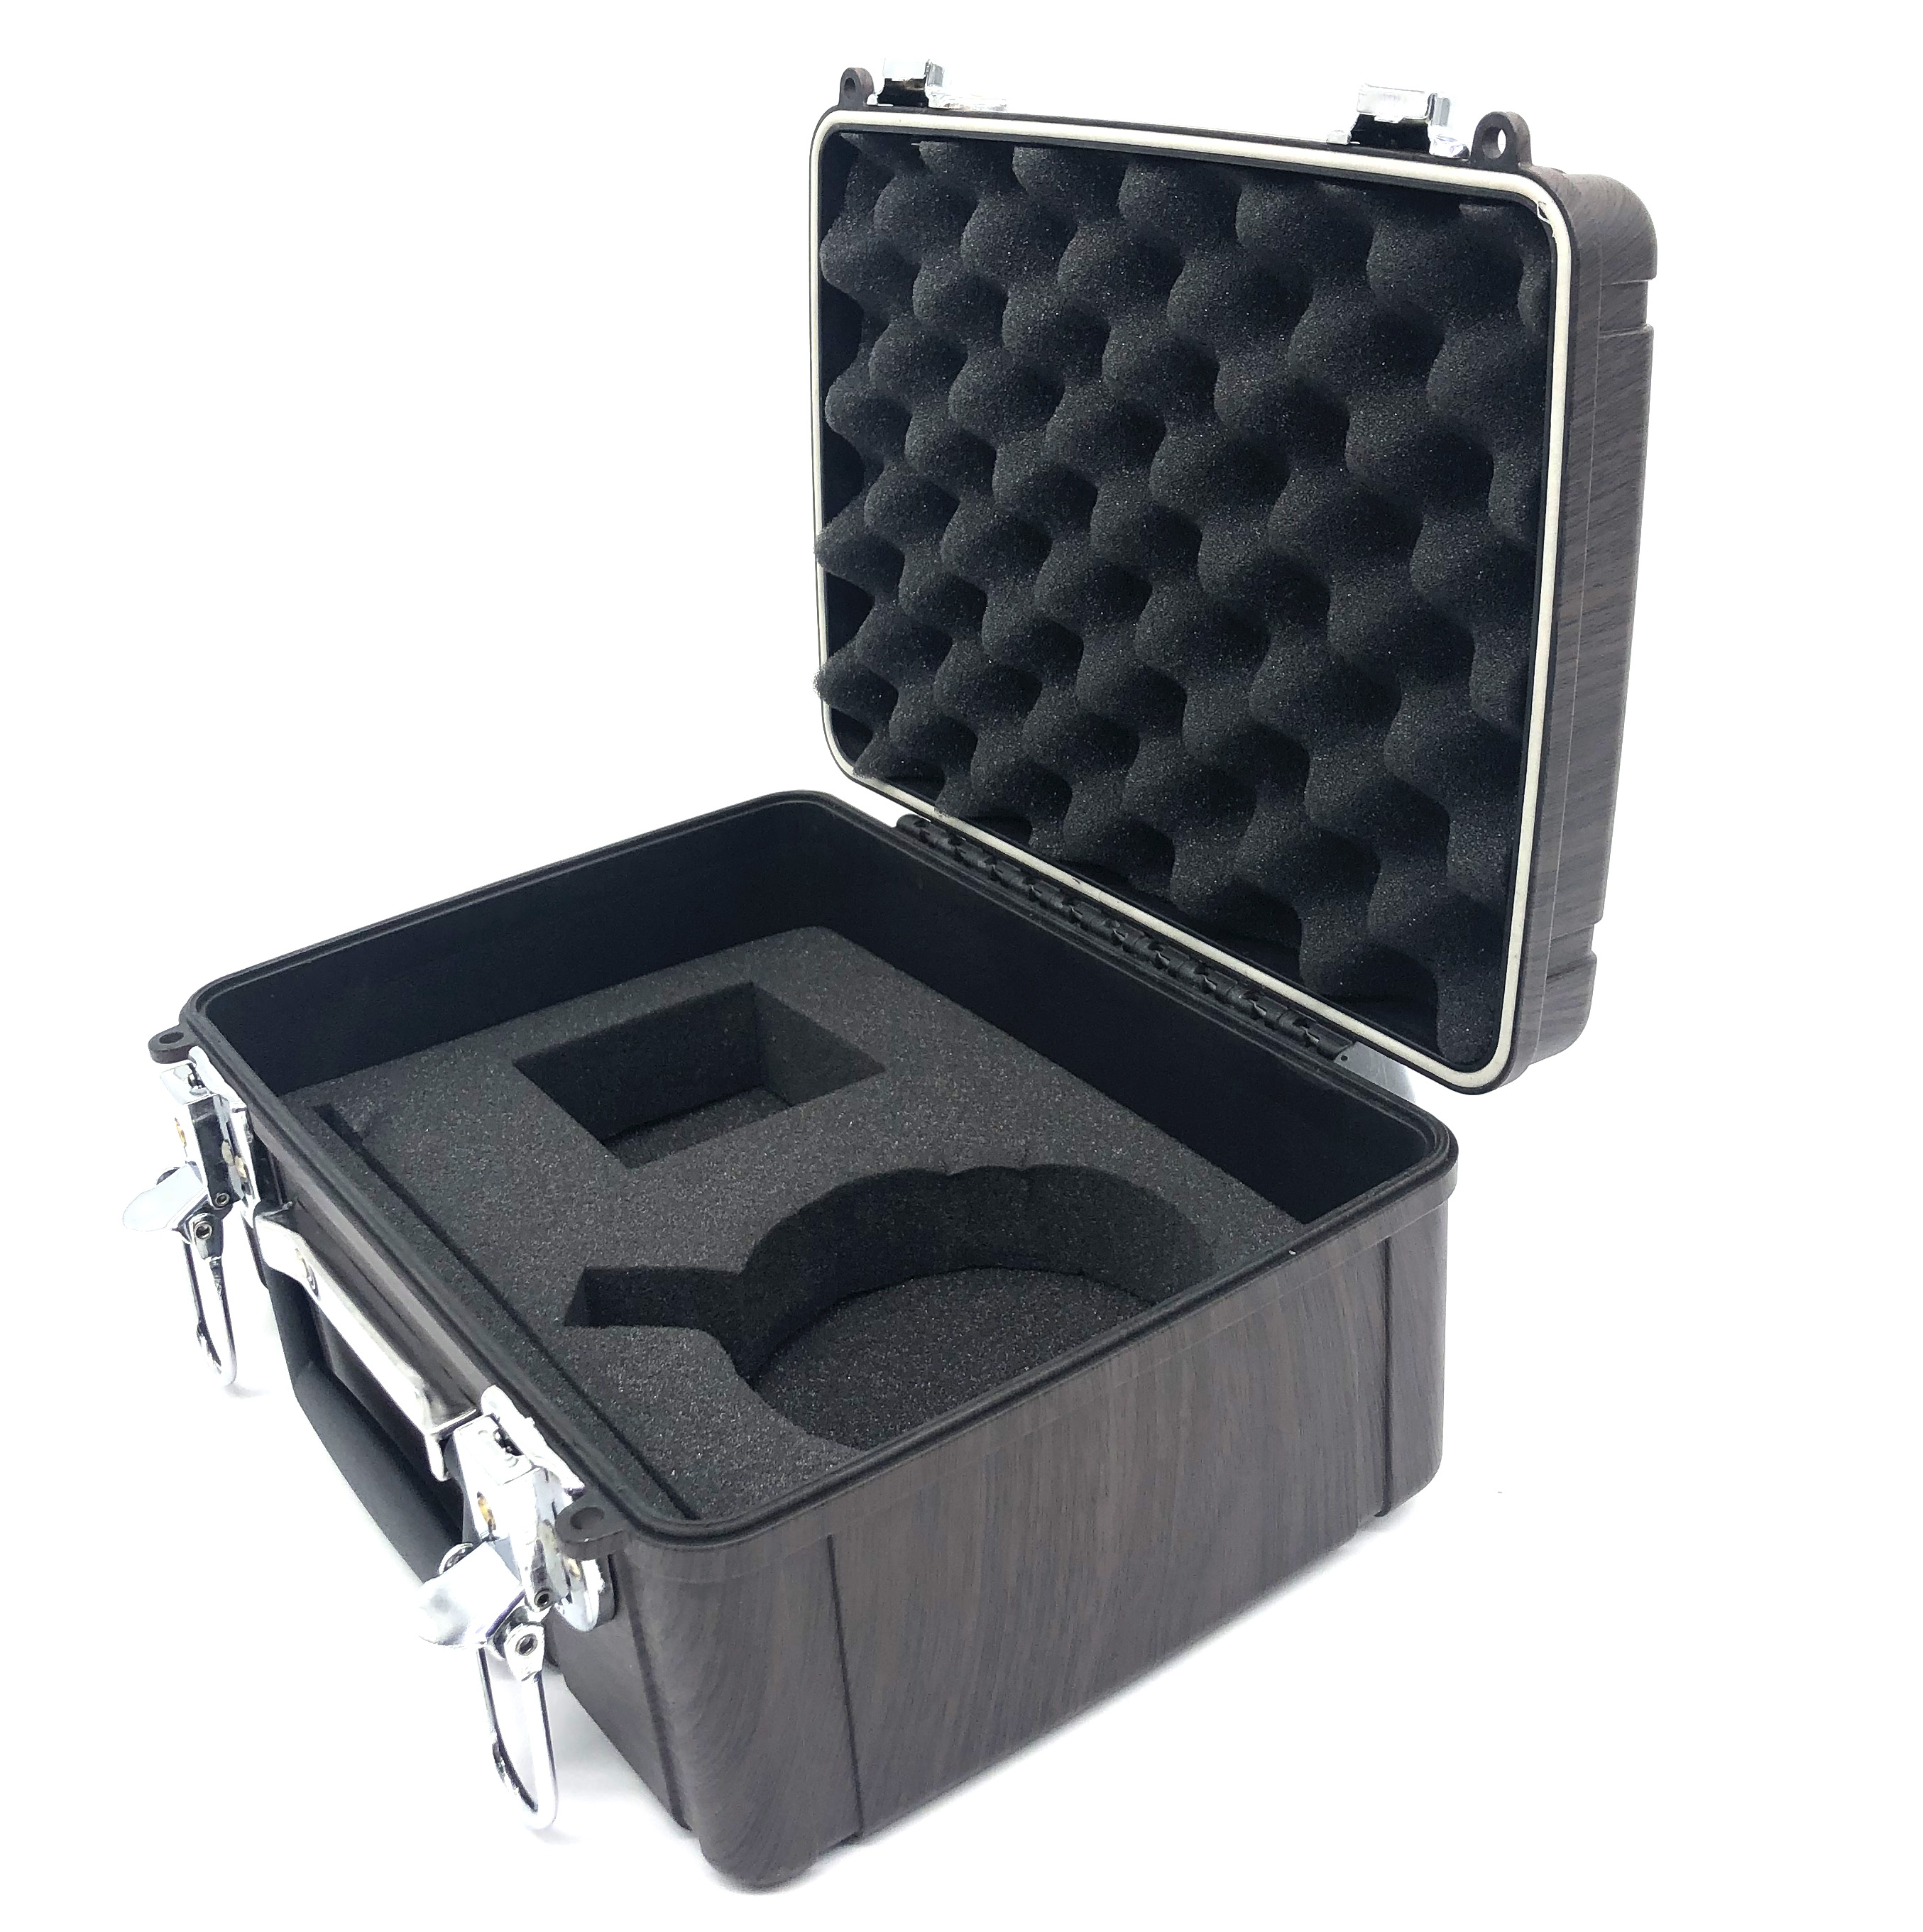 Hard plastic waterproof storage box hard travel carrying case compatible case for hiking